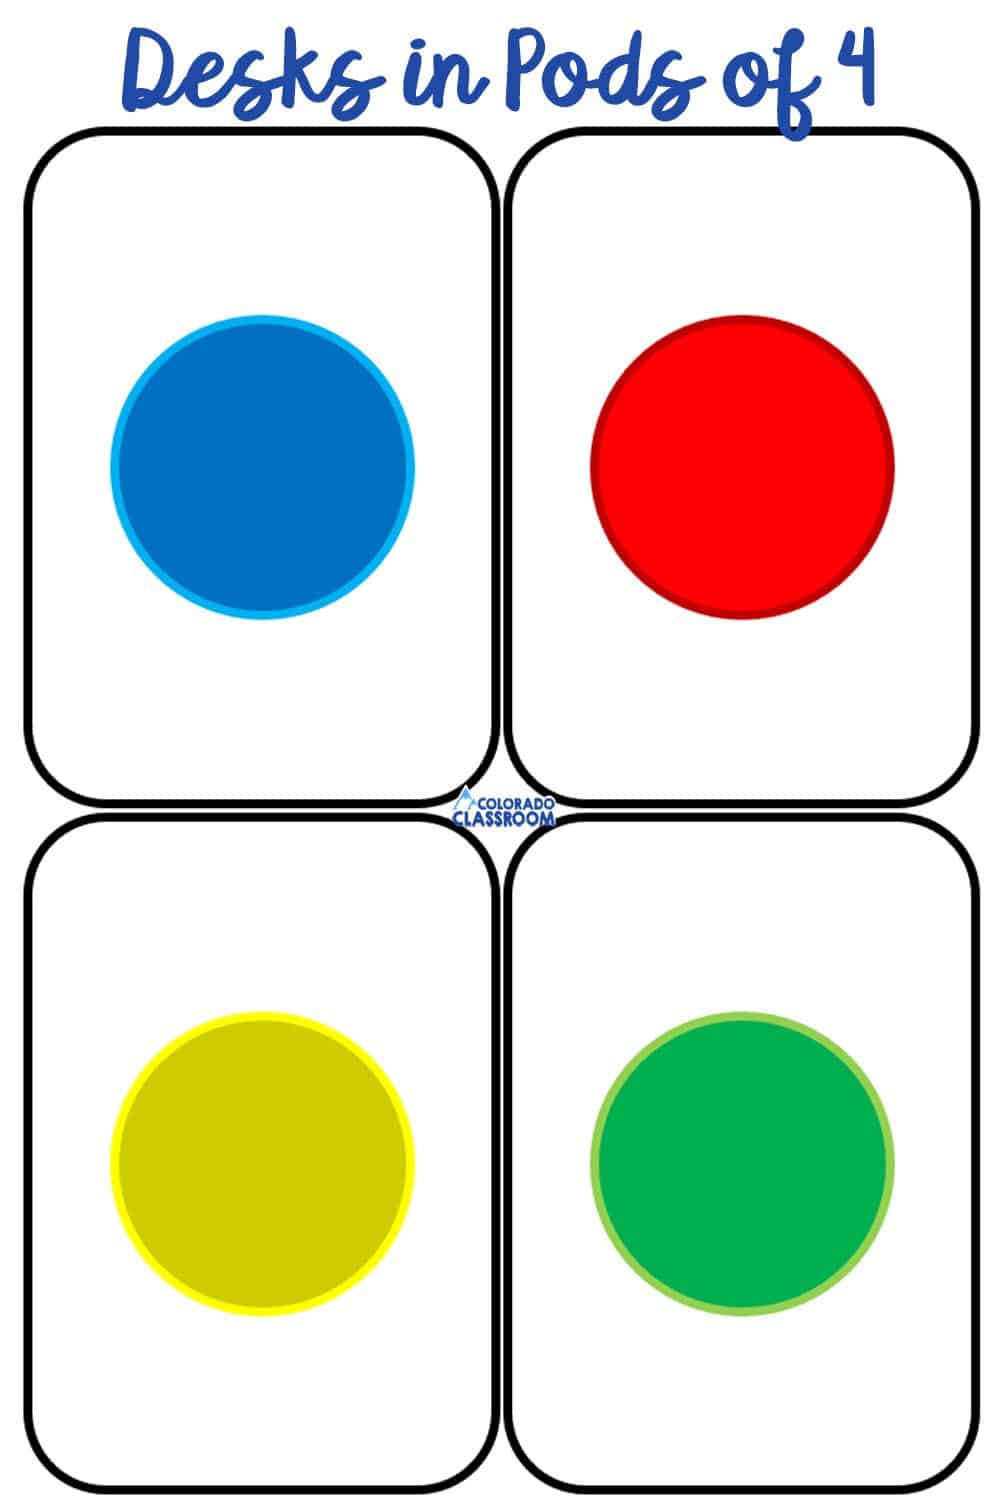 Graphic showing desks in pods of fours with sticker placement. Blue - upper left. Red - upper right. Yellow - lower left. Green - lower right.